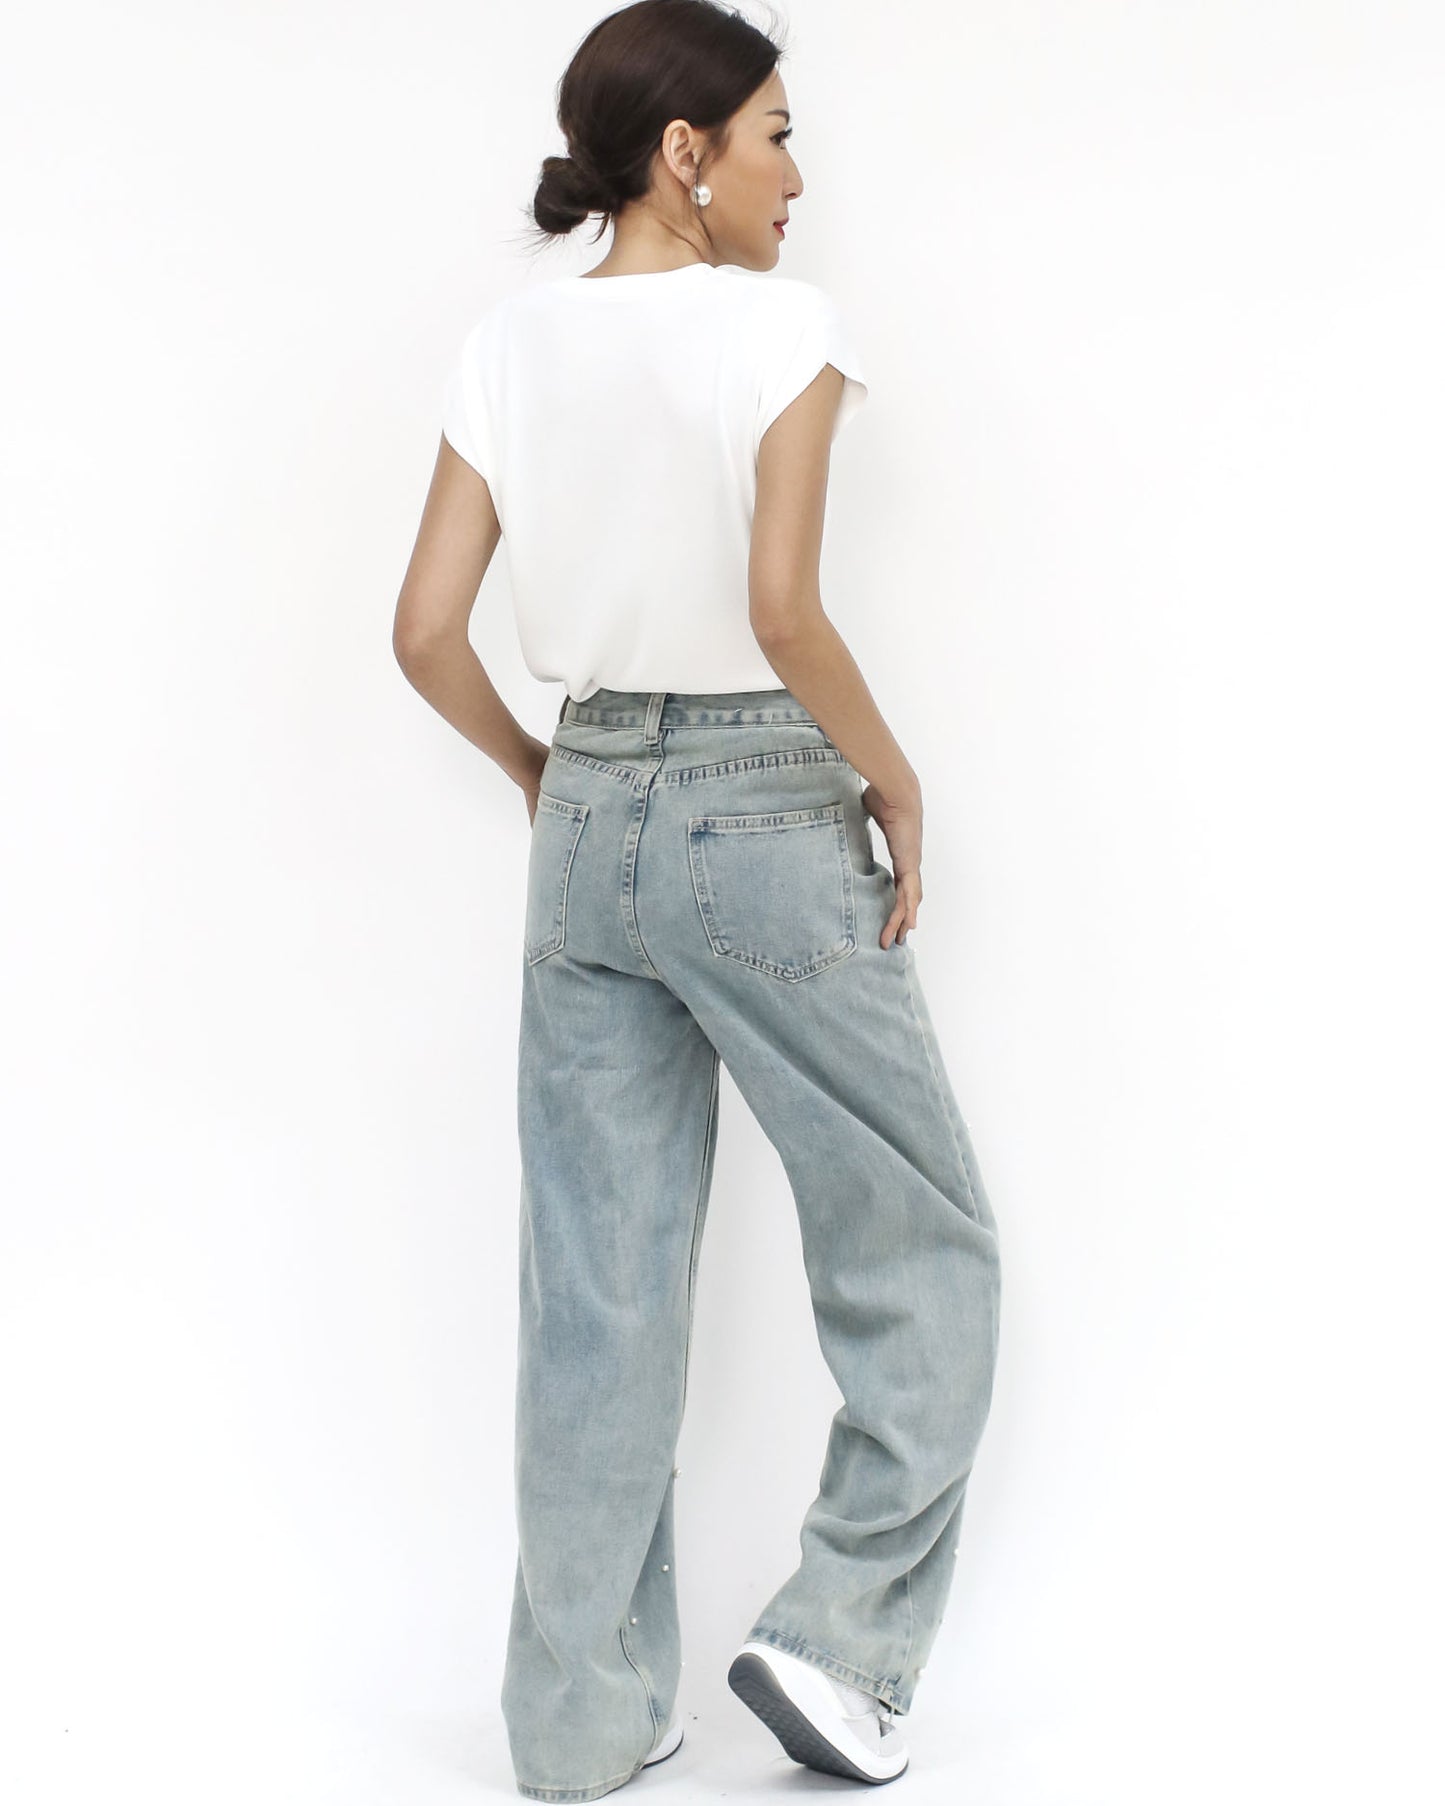 blue washed denim pearls straight legs jeans *pre-order*